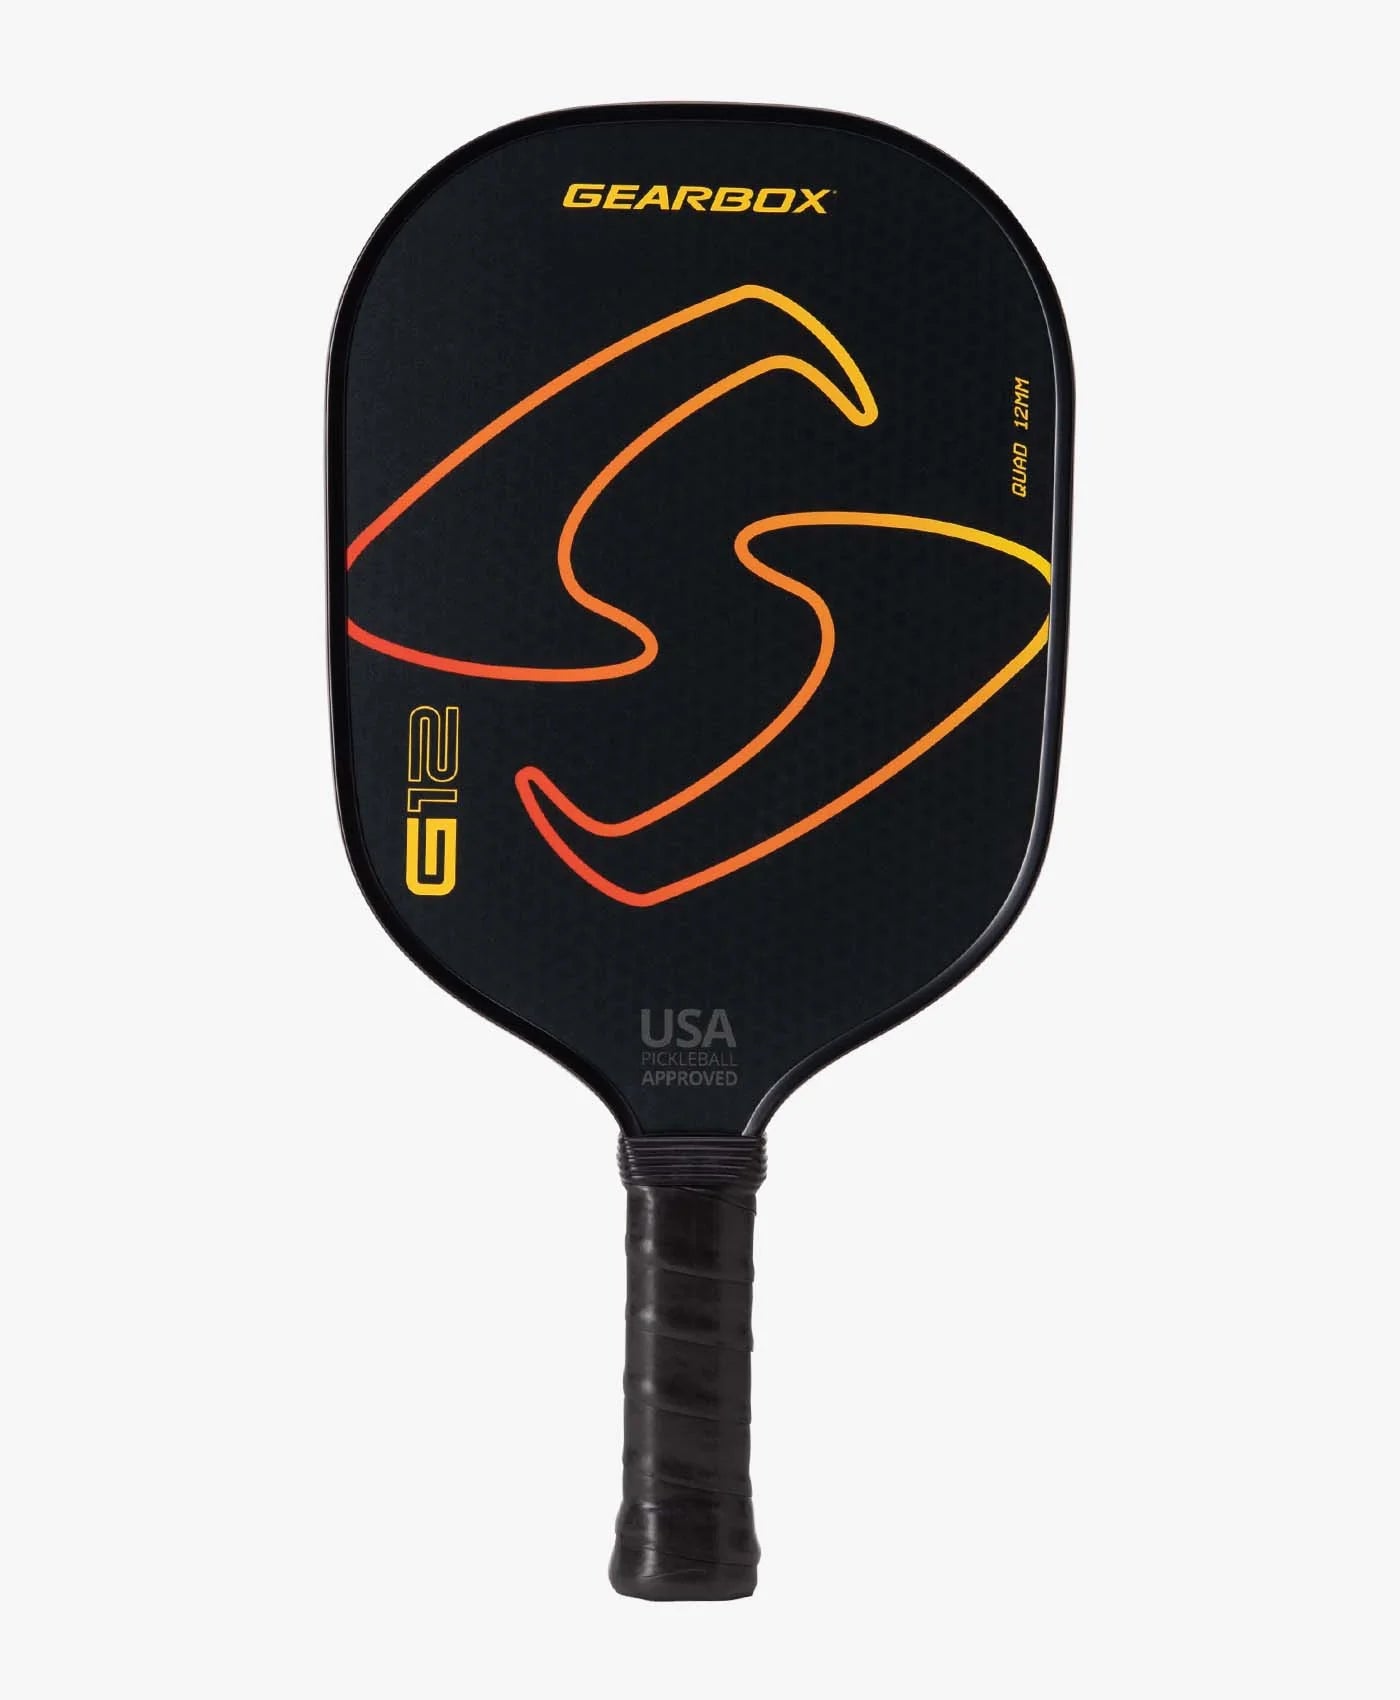 A black Gearbox G12 Quad 12mm Widebody pickleball paddle featuring a yellow and orange design, labeled "Gearbox G12" and marked "USA Approved".